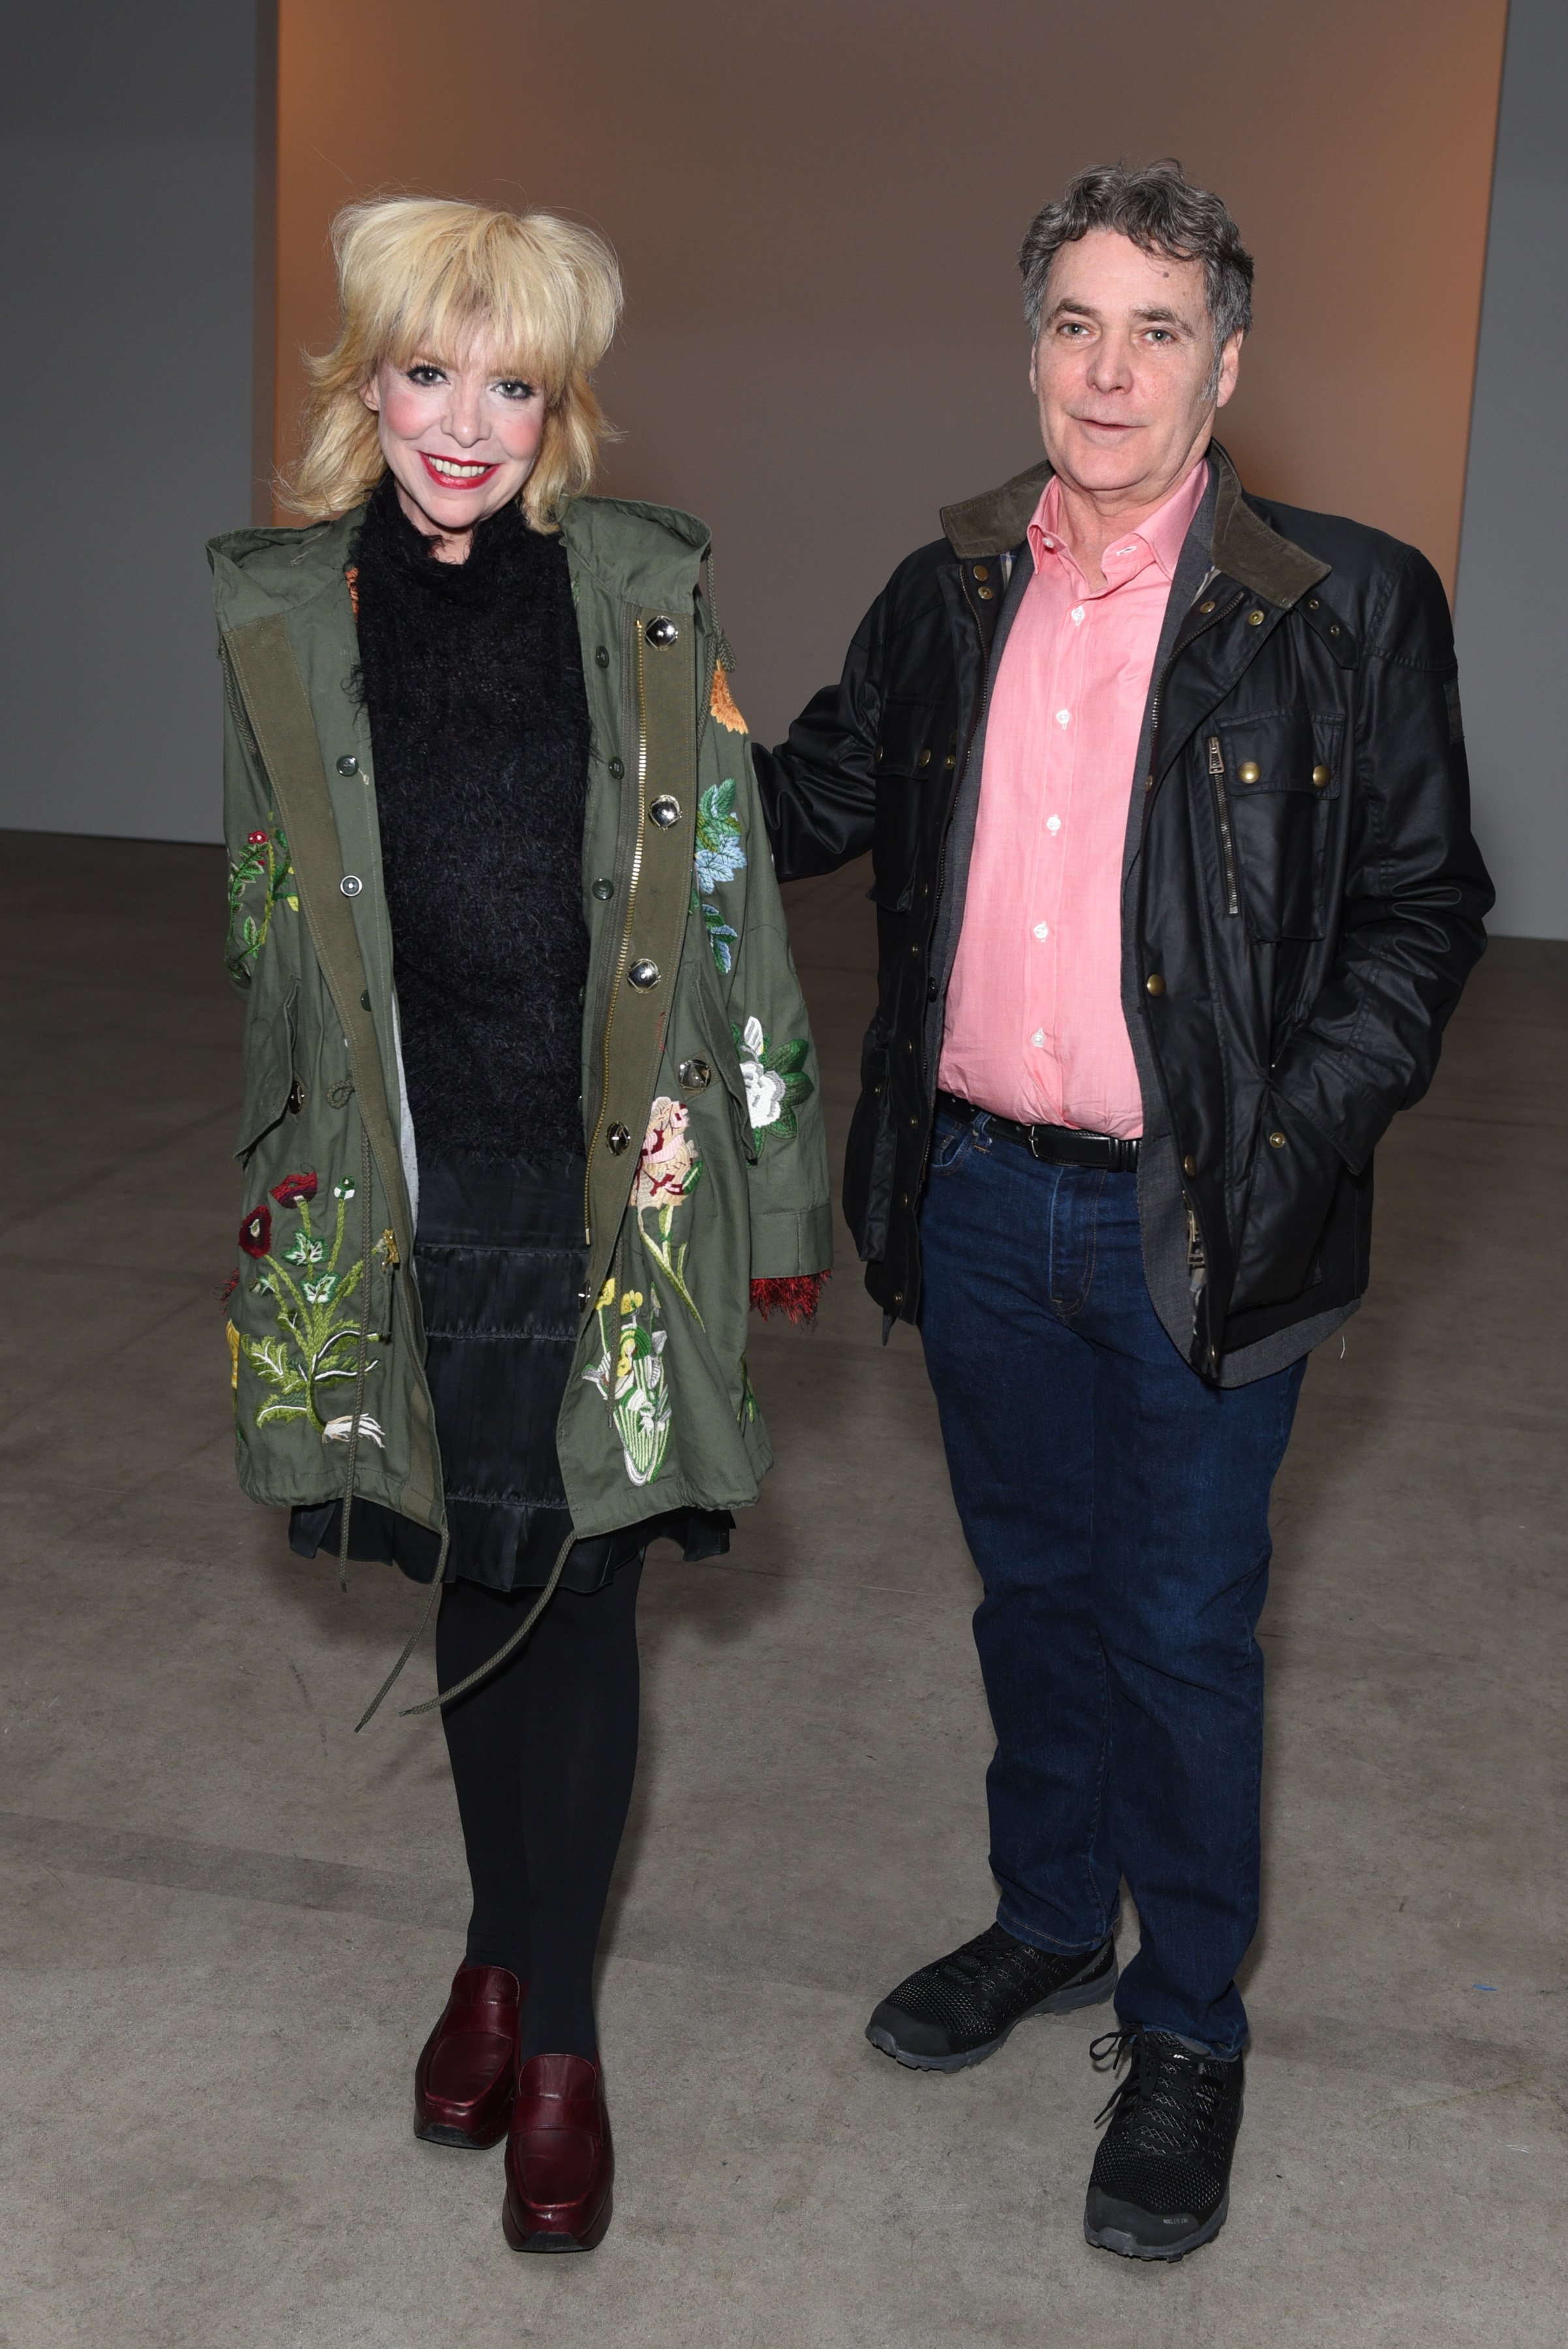 Julee Cruise and Edward Grinnan at the New York Fashion Week: The Shows on February 11, 2017 | Source: Getty Images